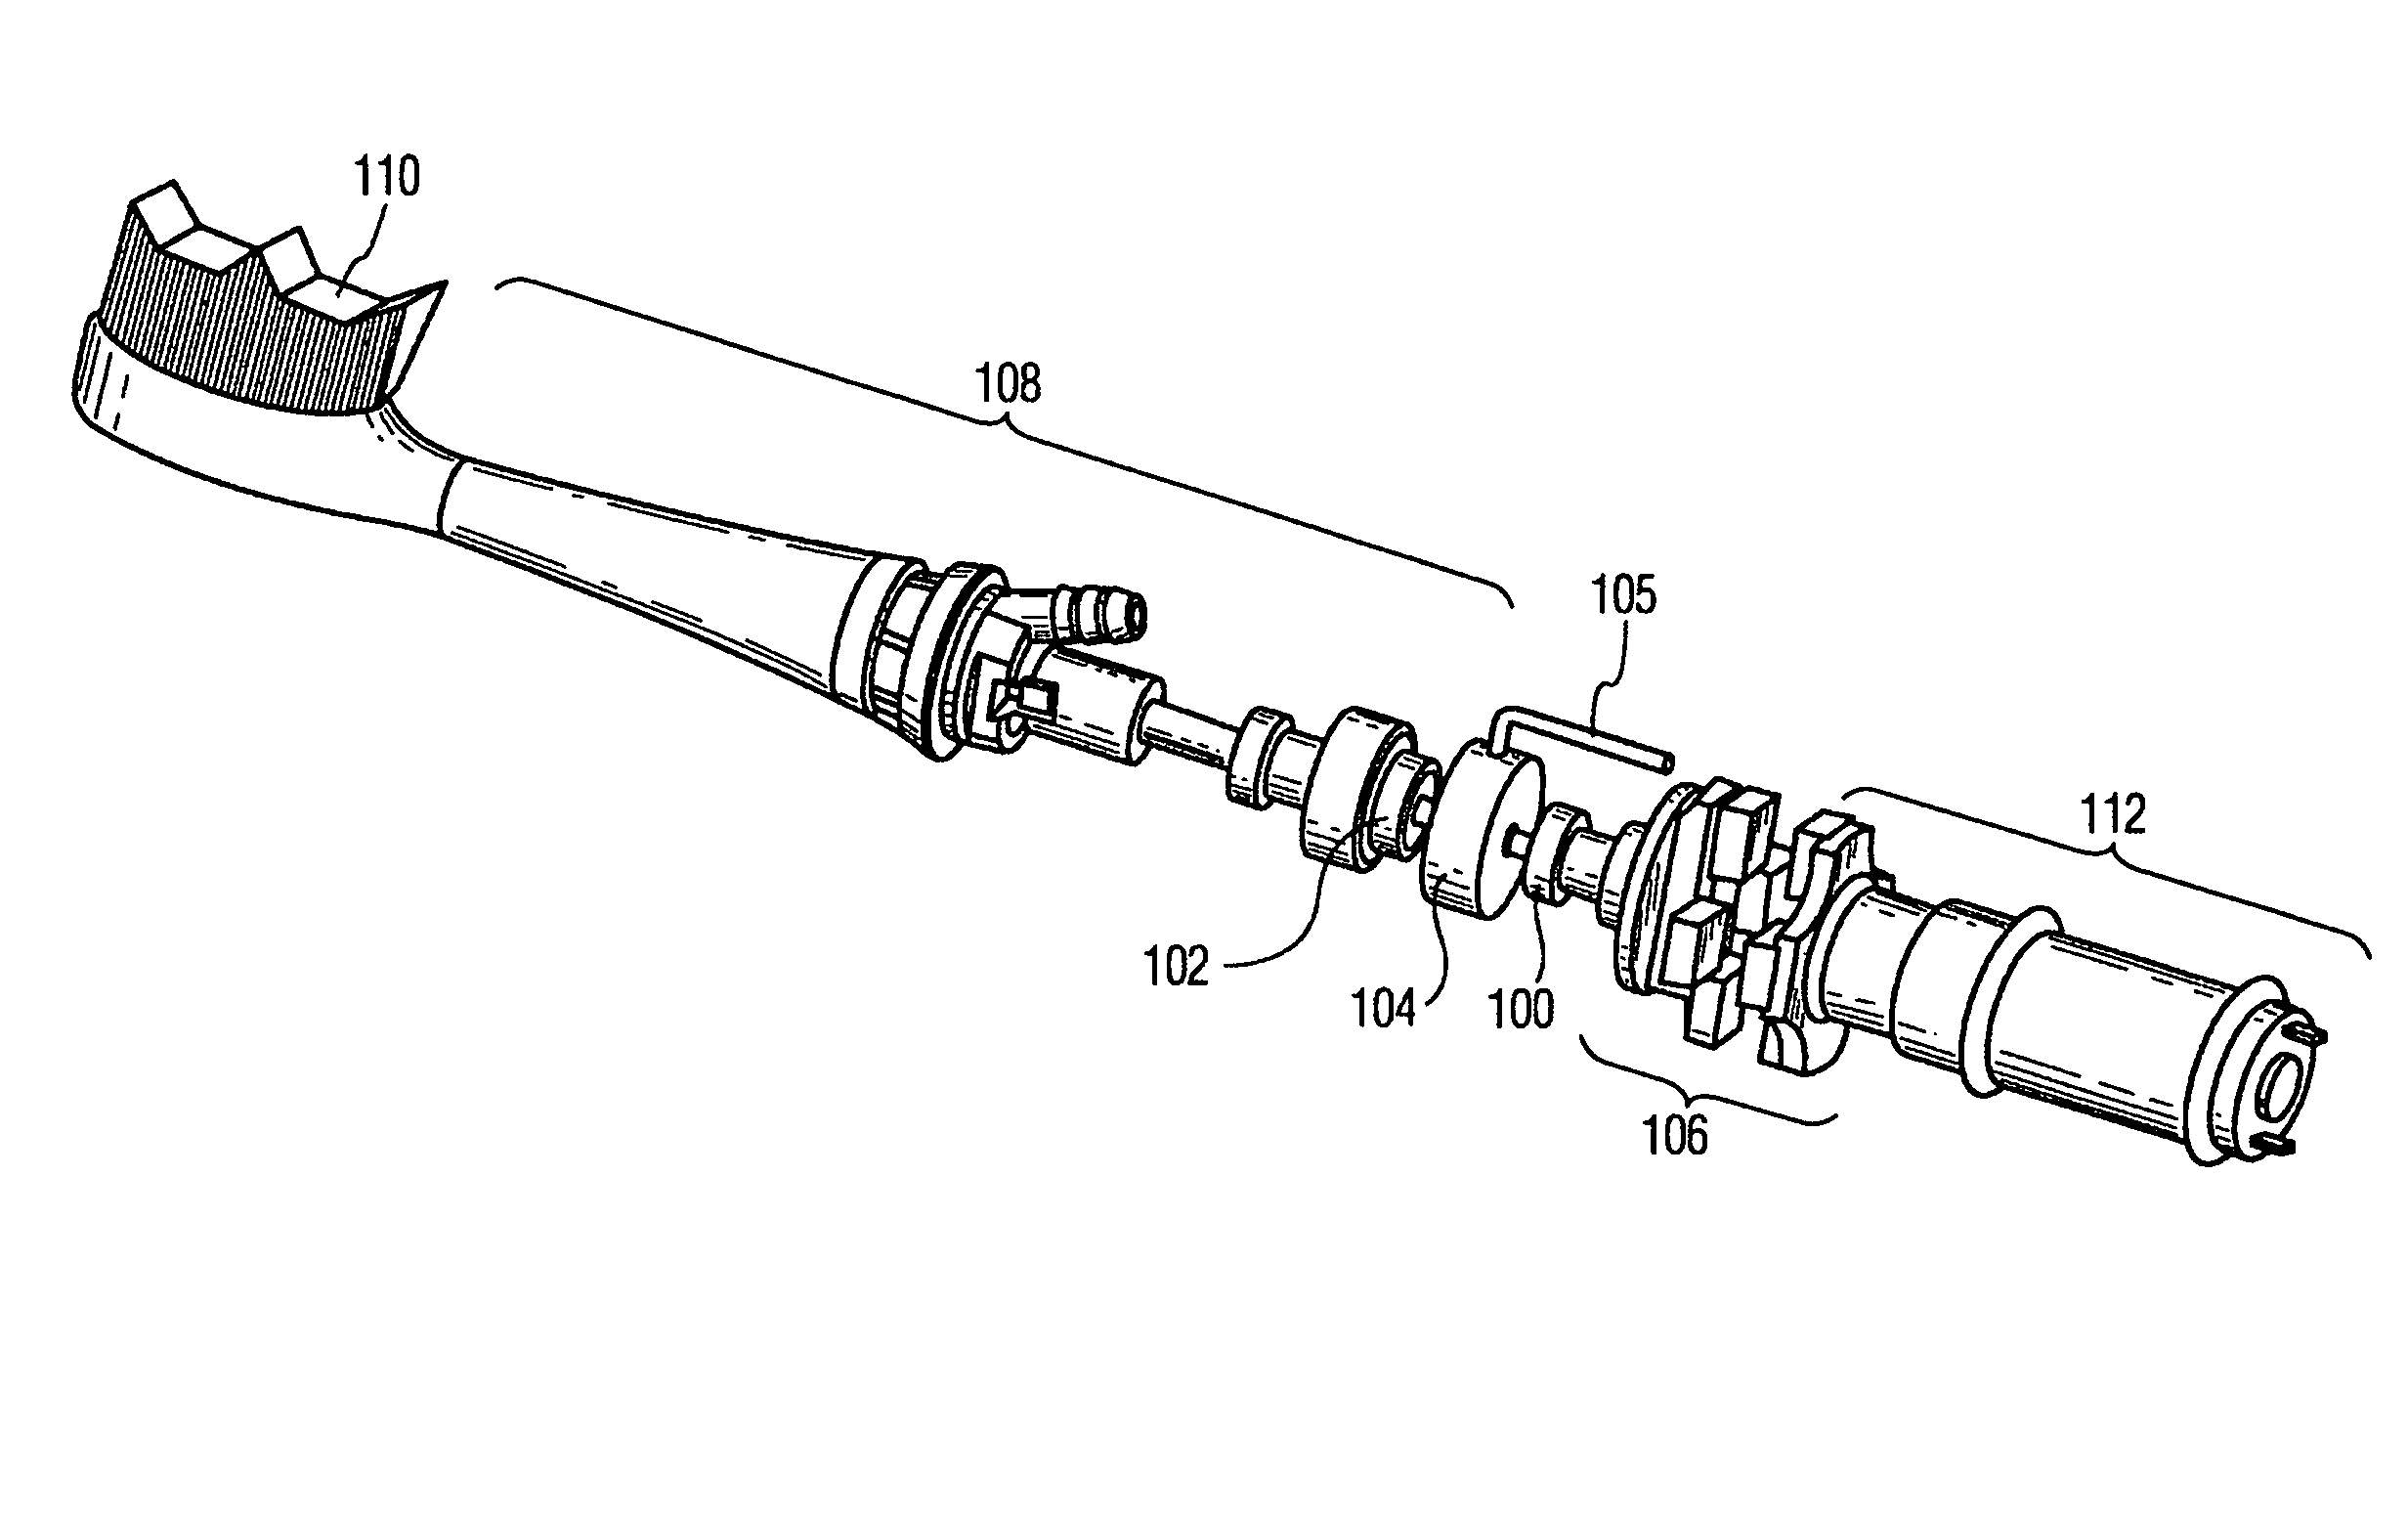 Reciprocating workpiece device with a drive system seeking the resonance of the driven system portion thereof